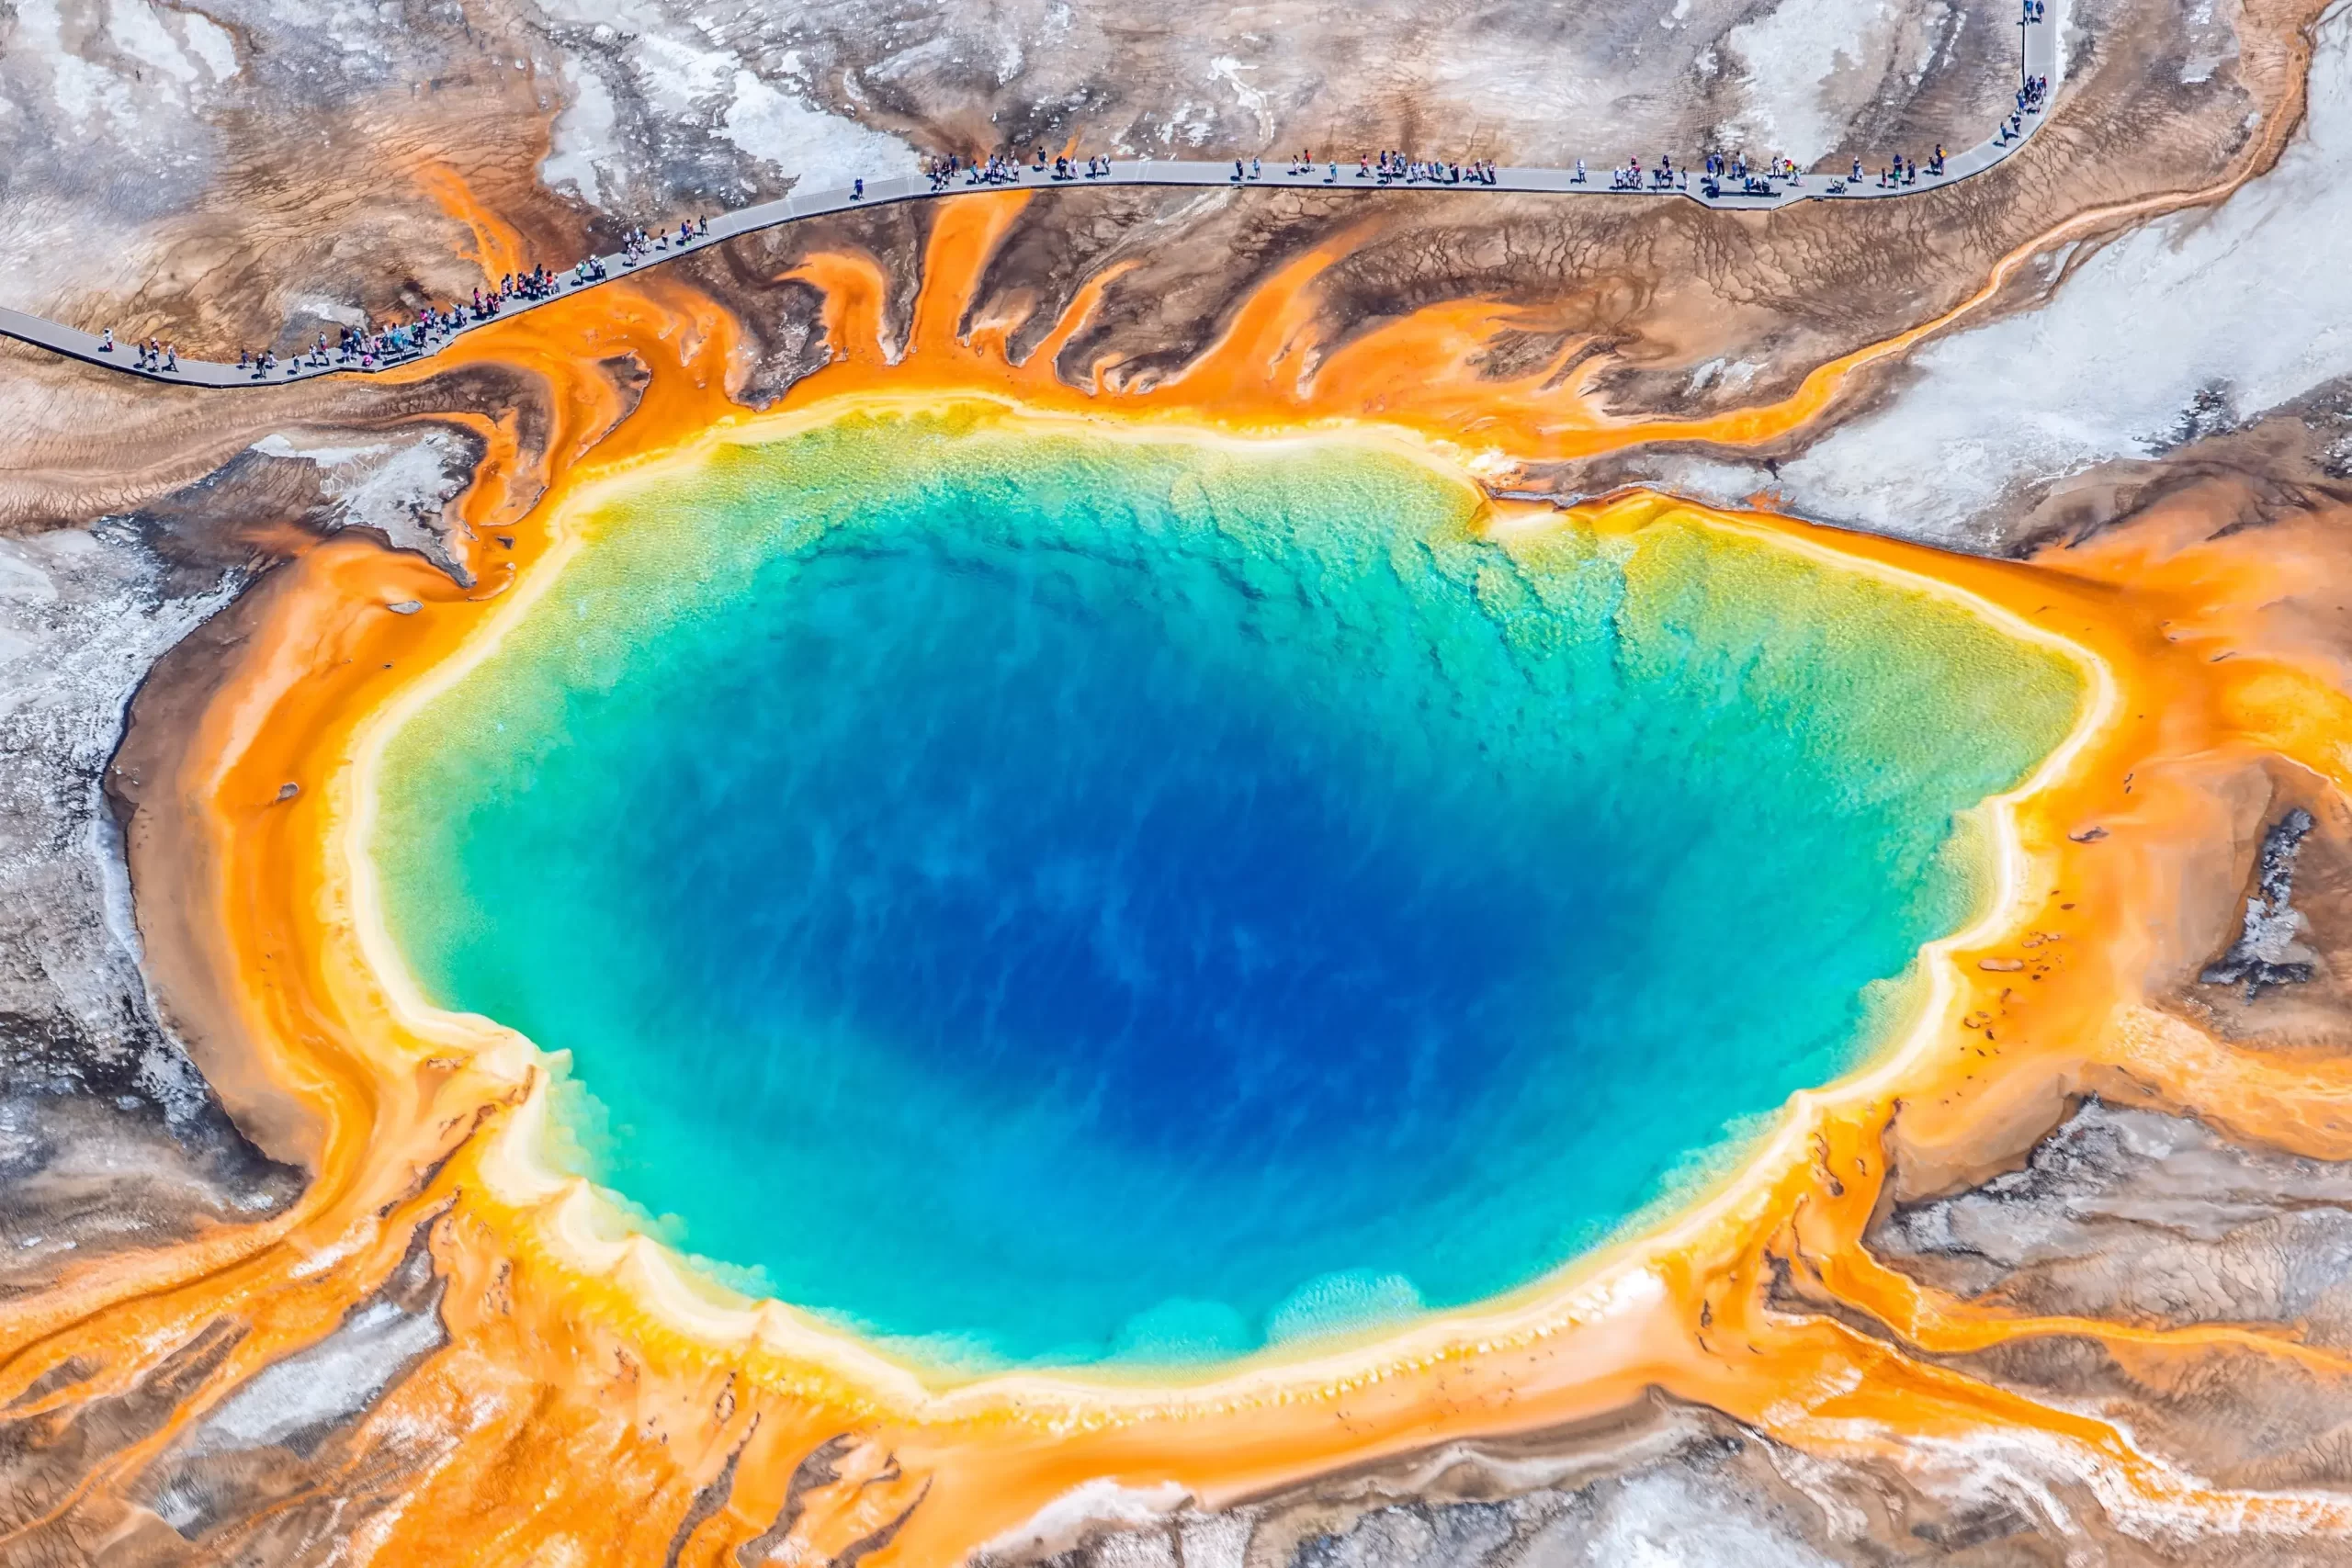 Yellowstone last erupted on a major scale 640,000 years ago (Image: GETTY)